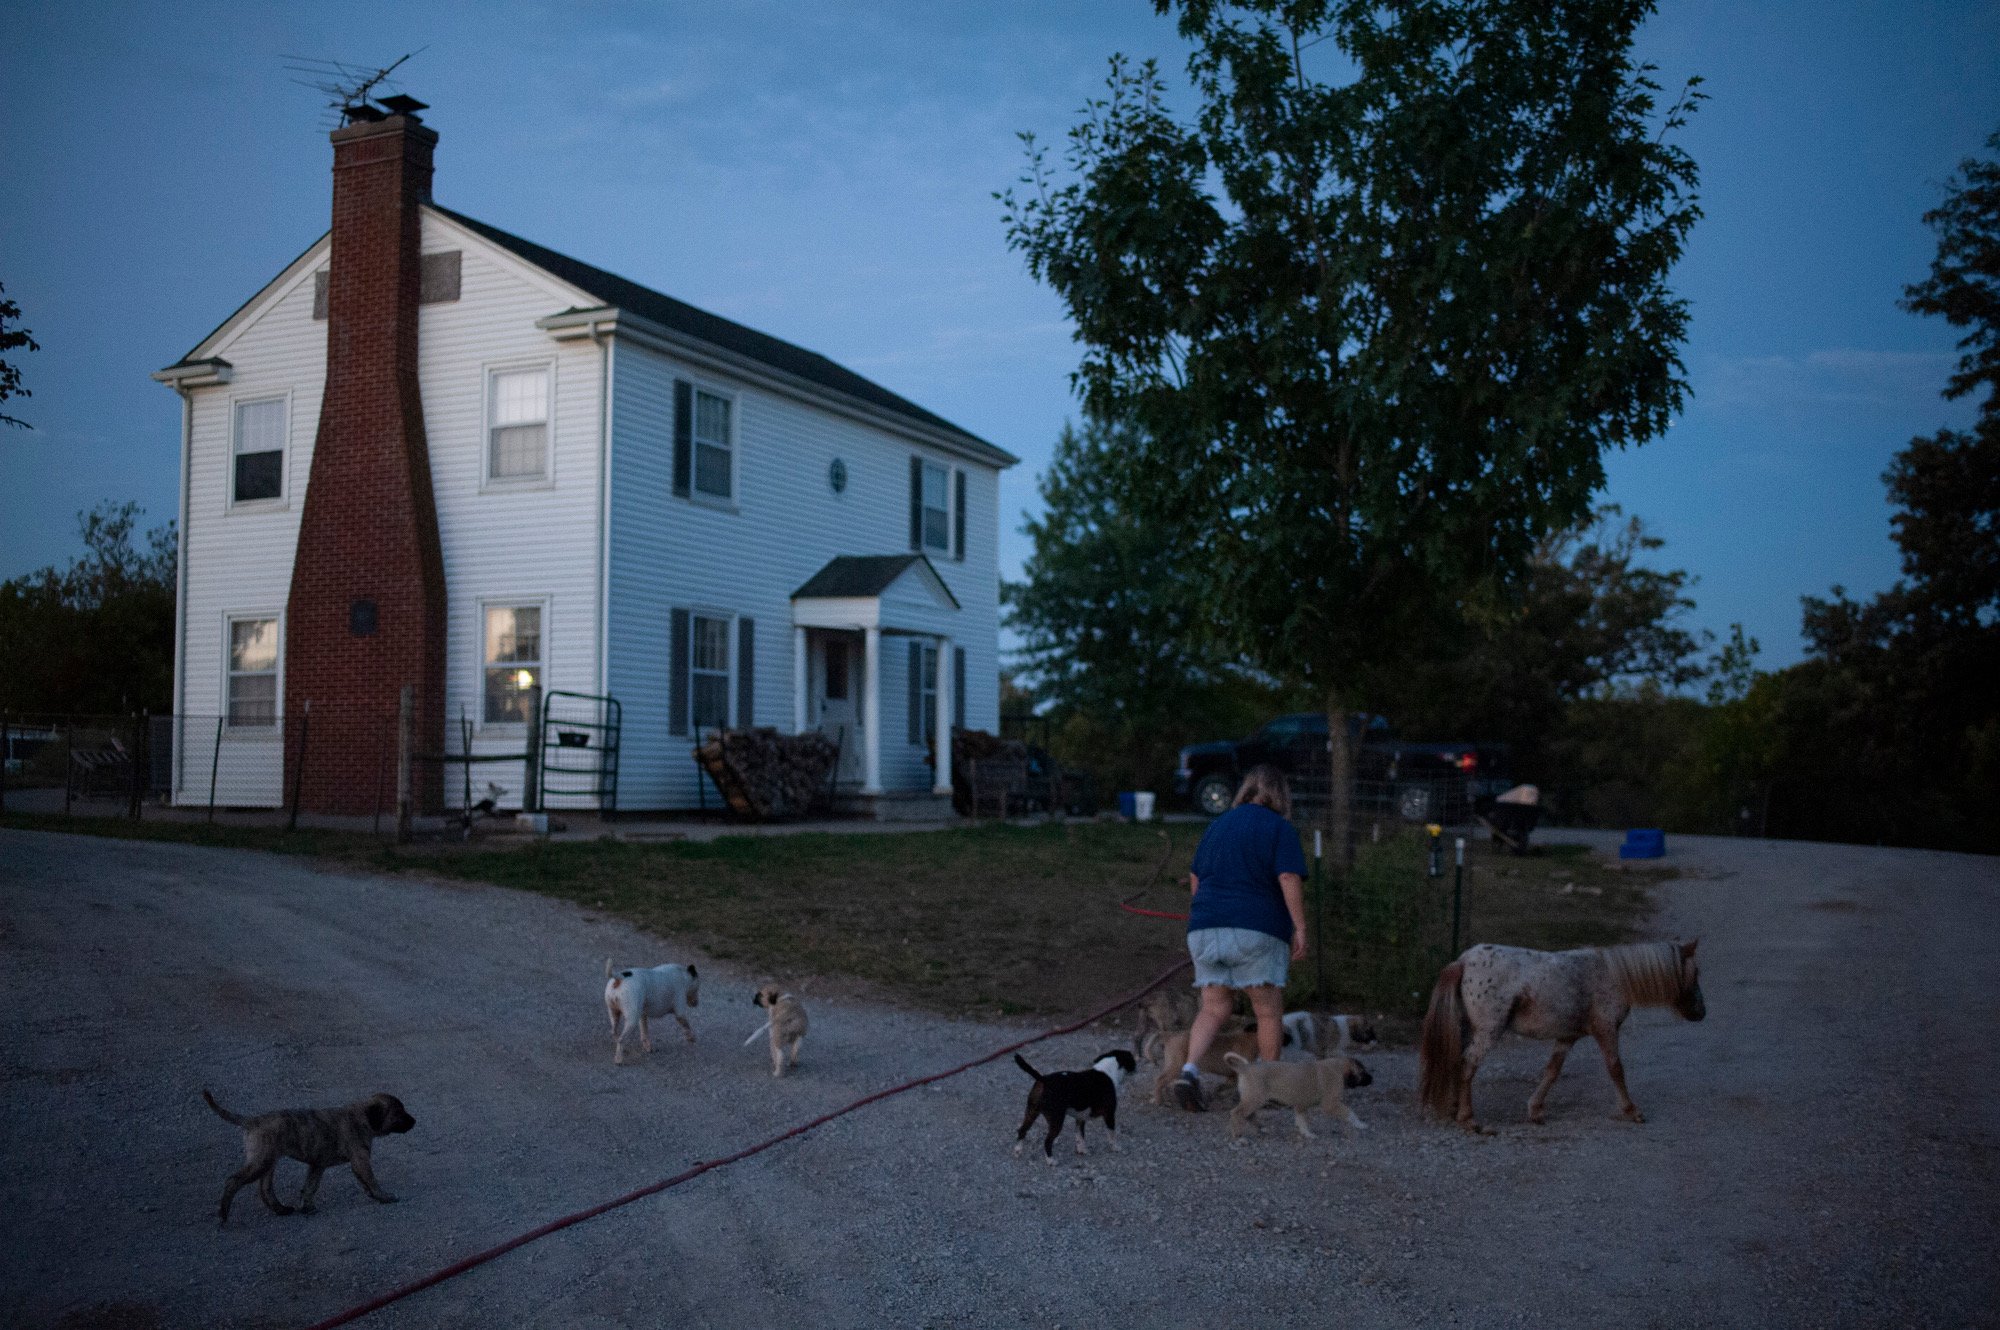   Accompanied by numerous animals, Mary Roelofsz tends to the morning’s tasks at Dreamers' Farm outside of Excelsior Springs, Missouri. The dreamers mentioned in the name of the 45-acre farm north of Excelsior Springs are Mary and her mother, Bea Roe